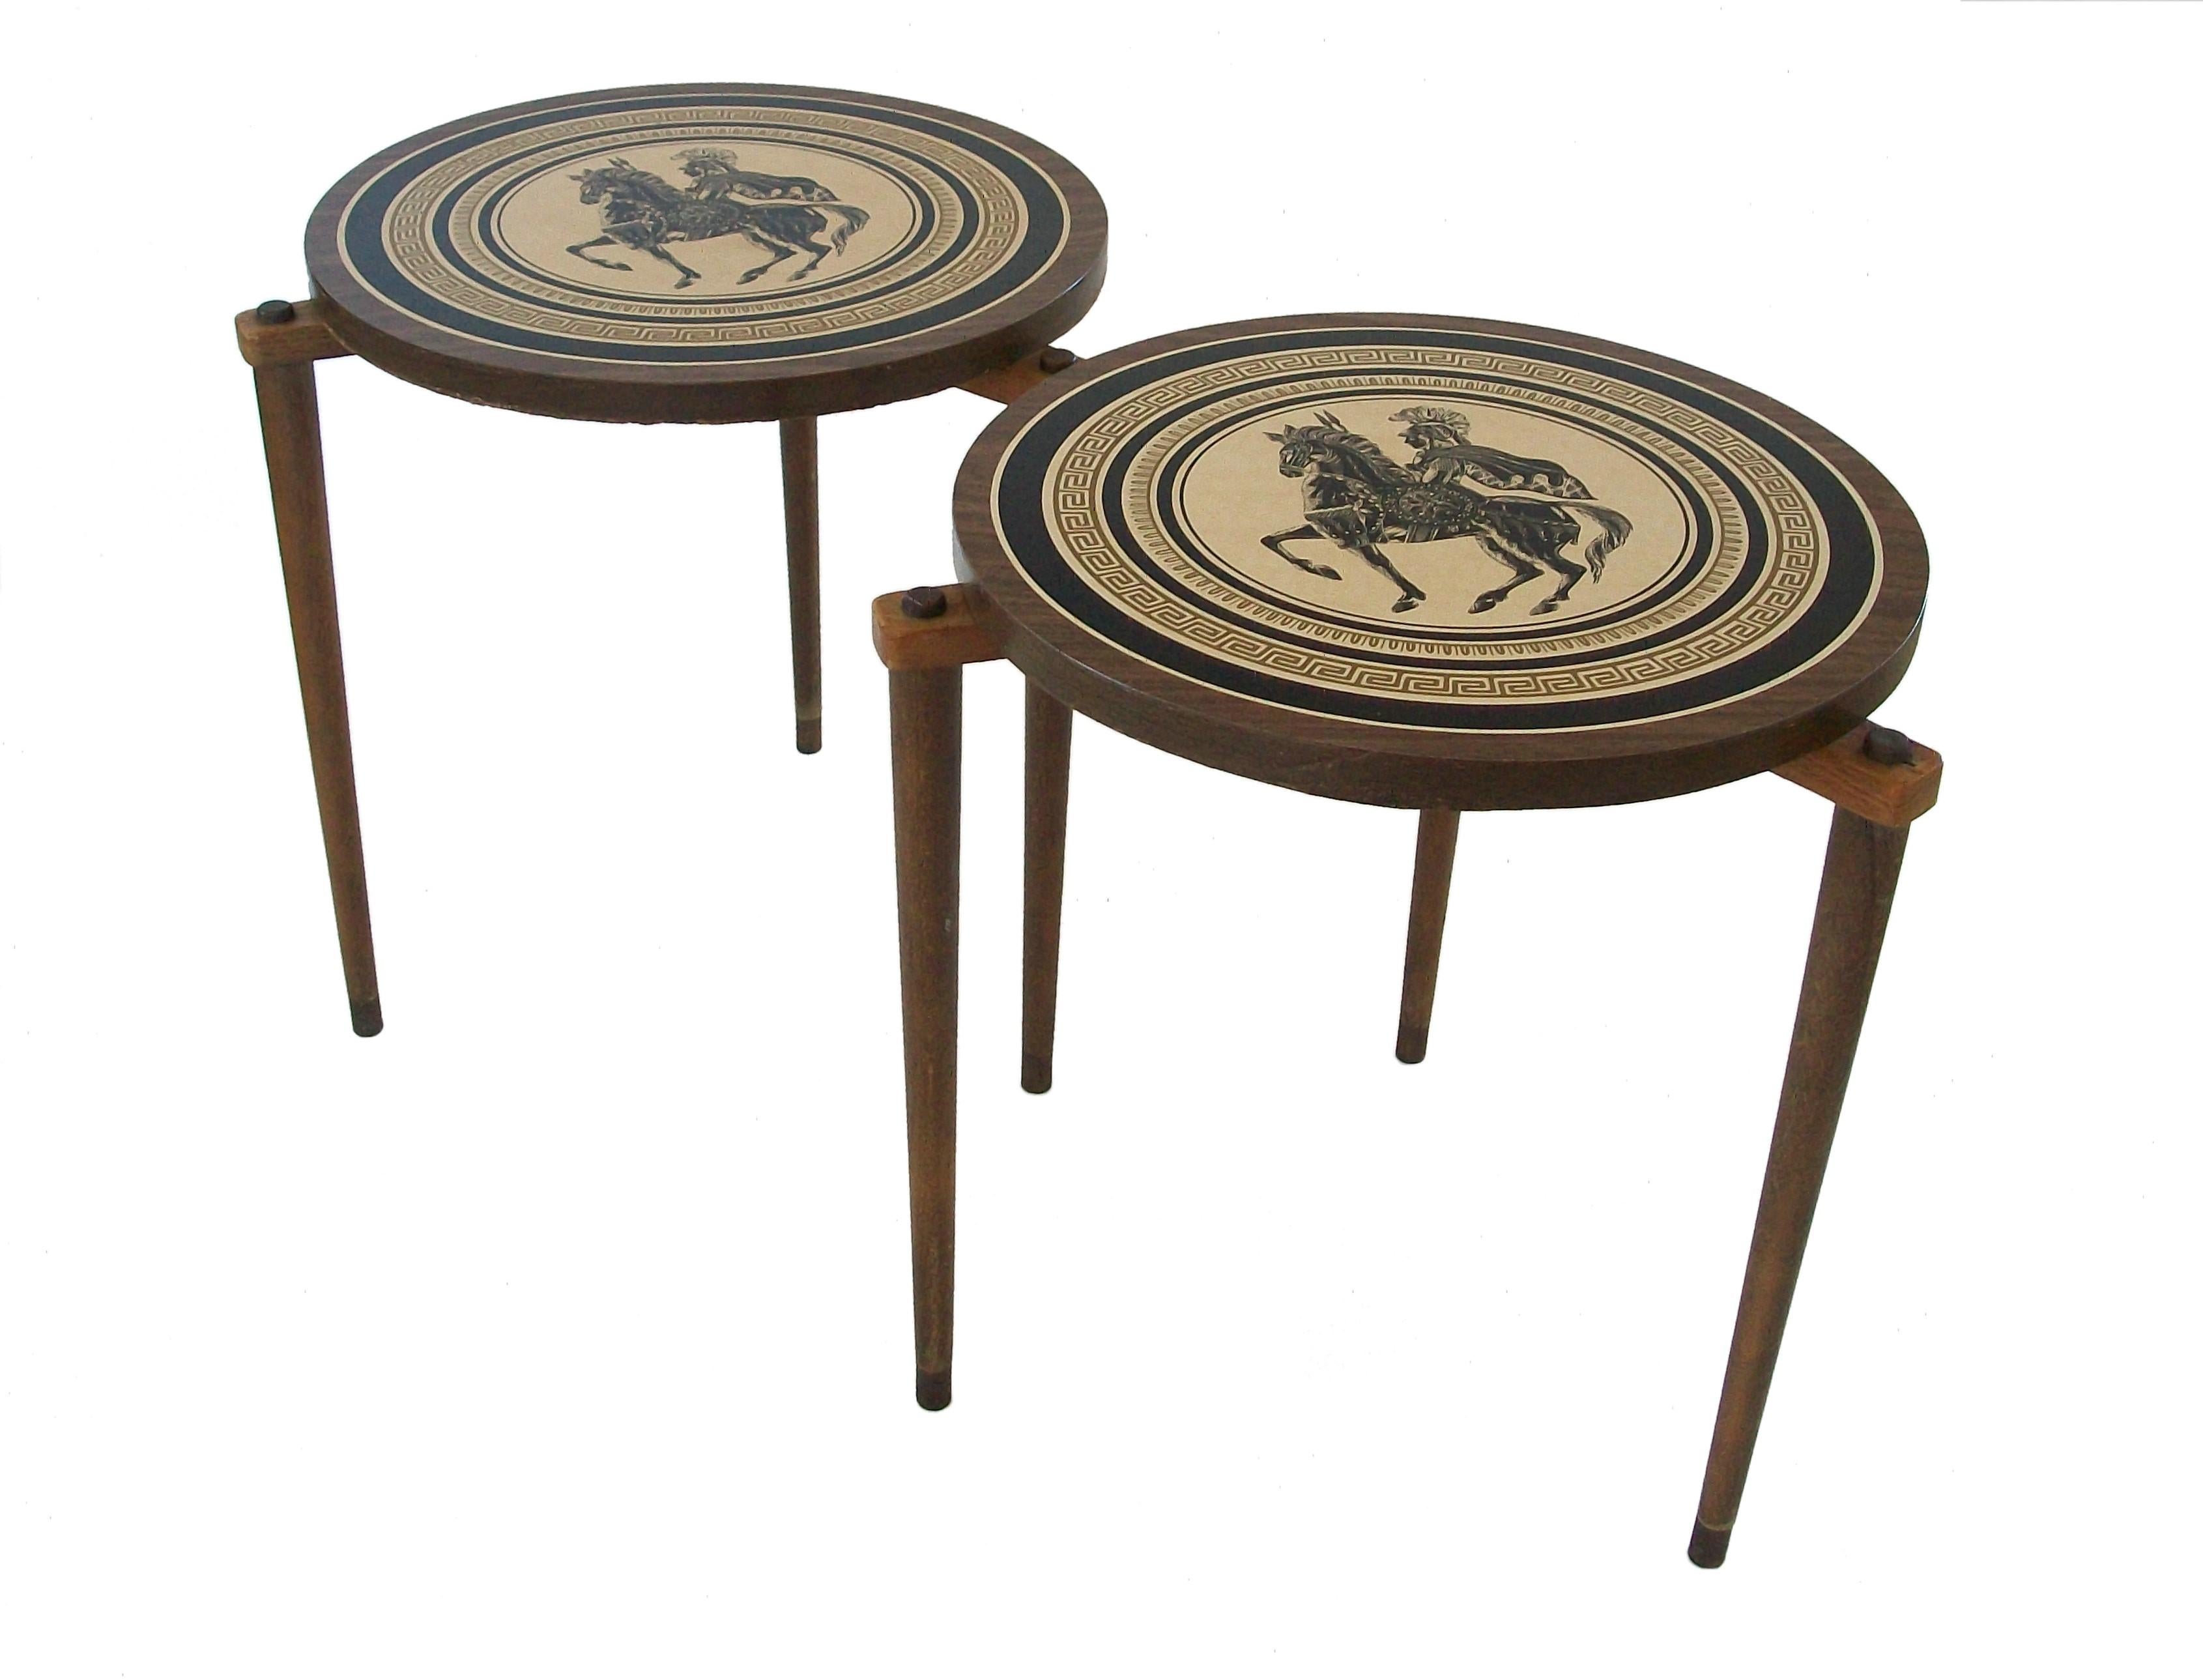 Vintage pair of Fornasetti style occasional or cocktail tables - printed plastic laminate tops and trim - turned and tapered wood legs with brass foot caps - stackable design with plastic glides to the underside of each table - unsigned - United